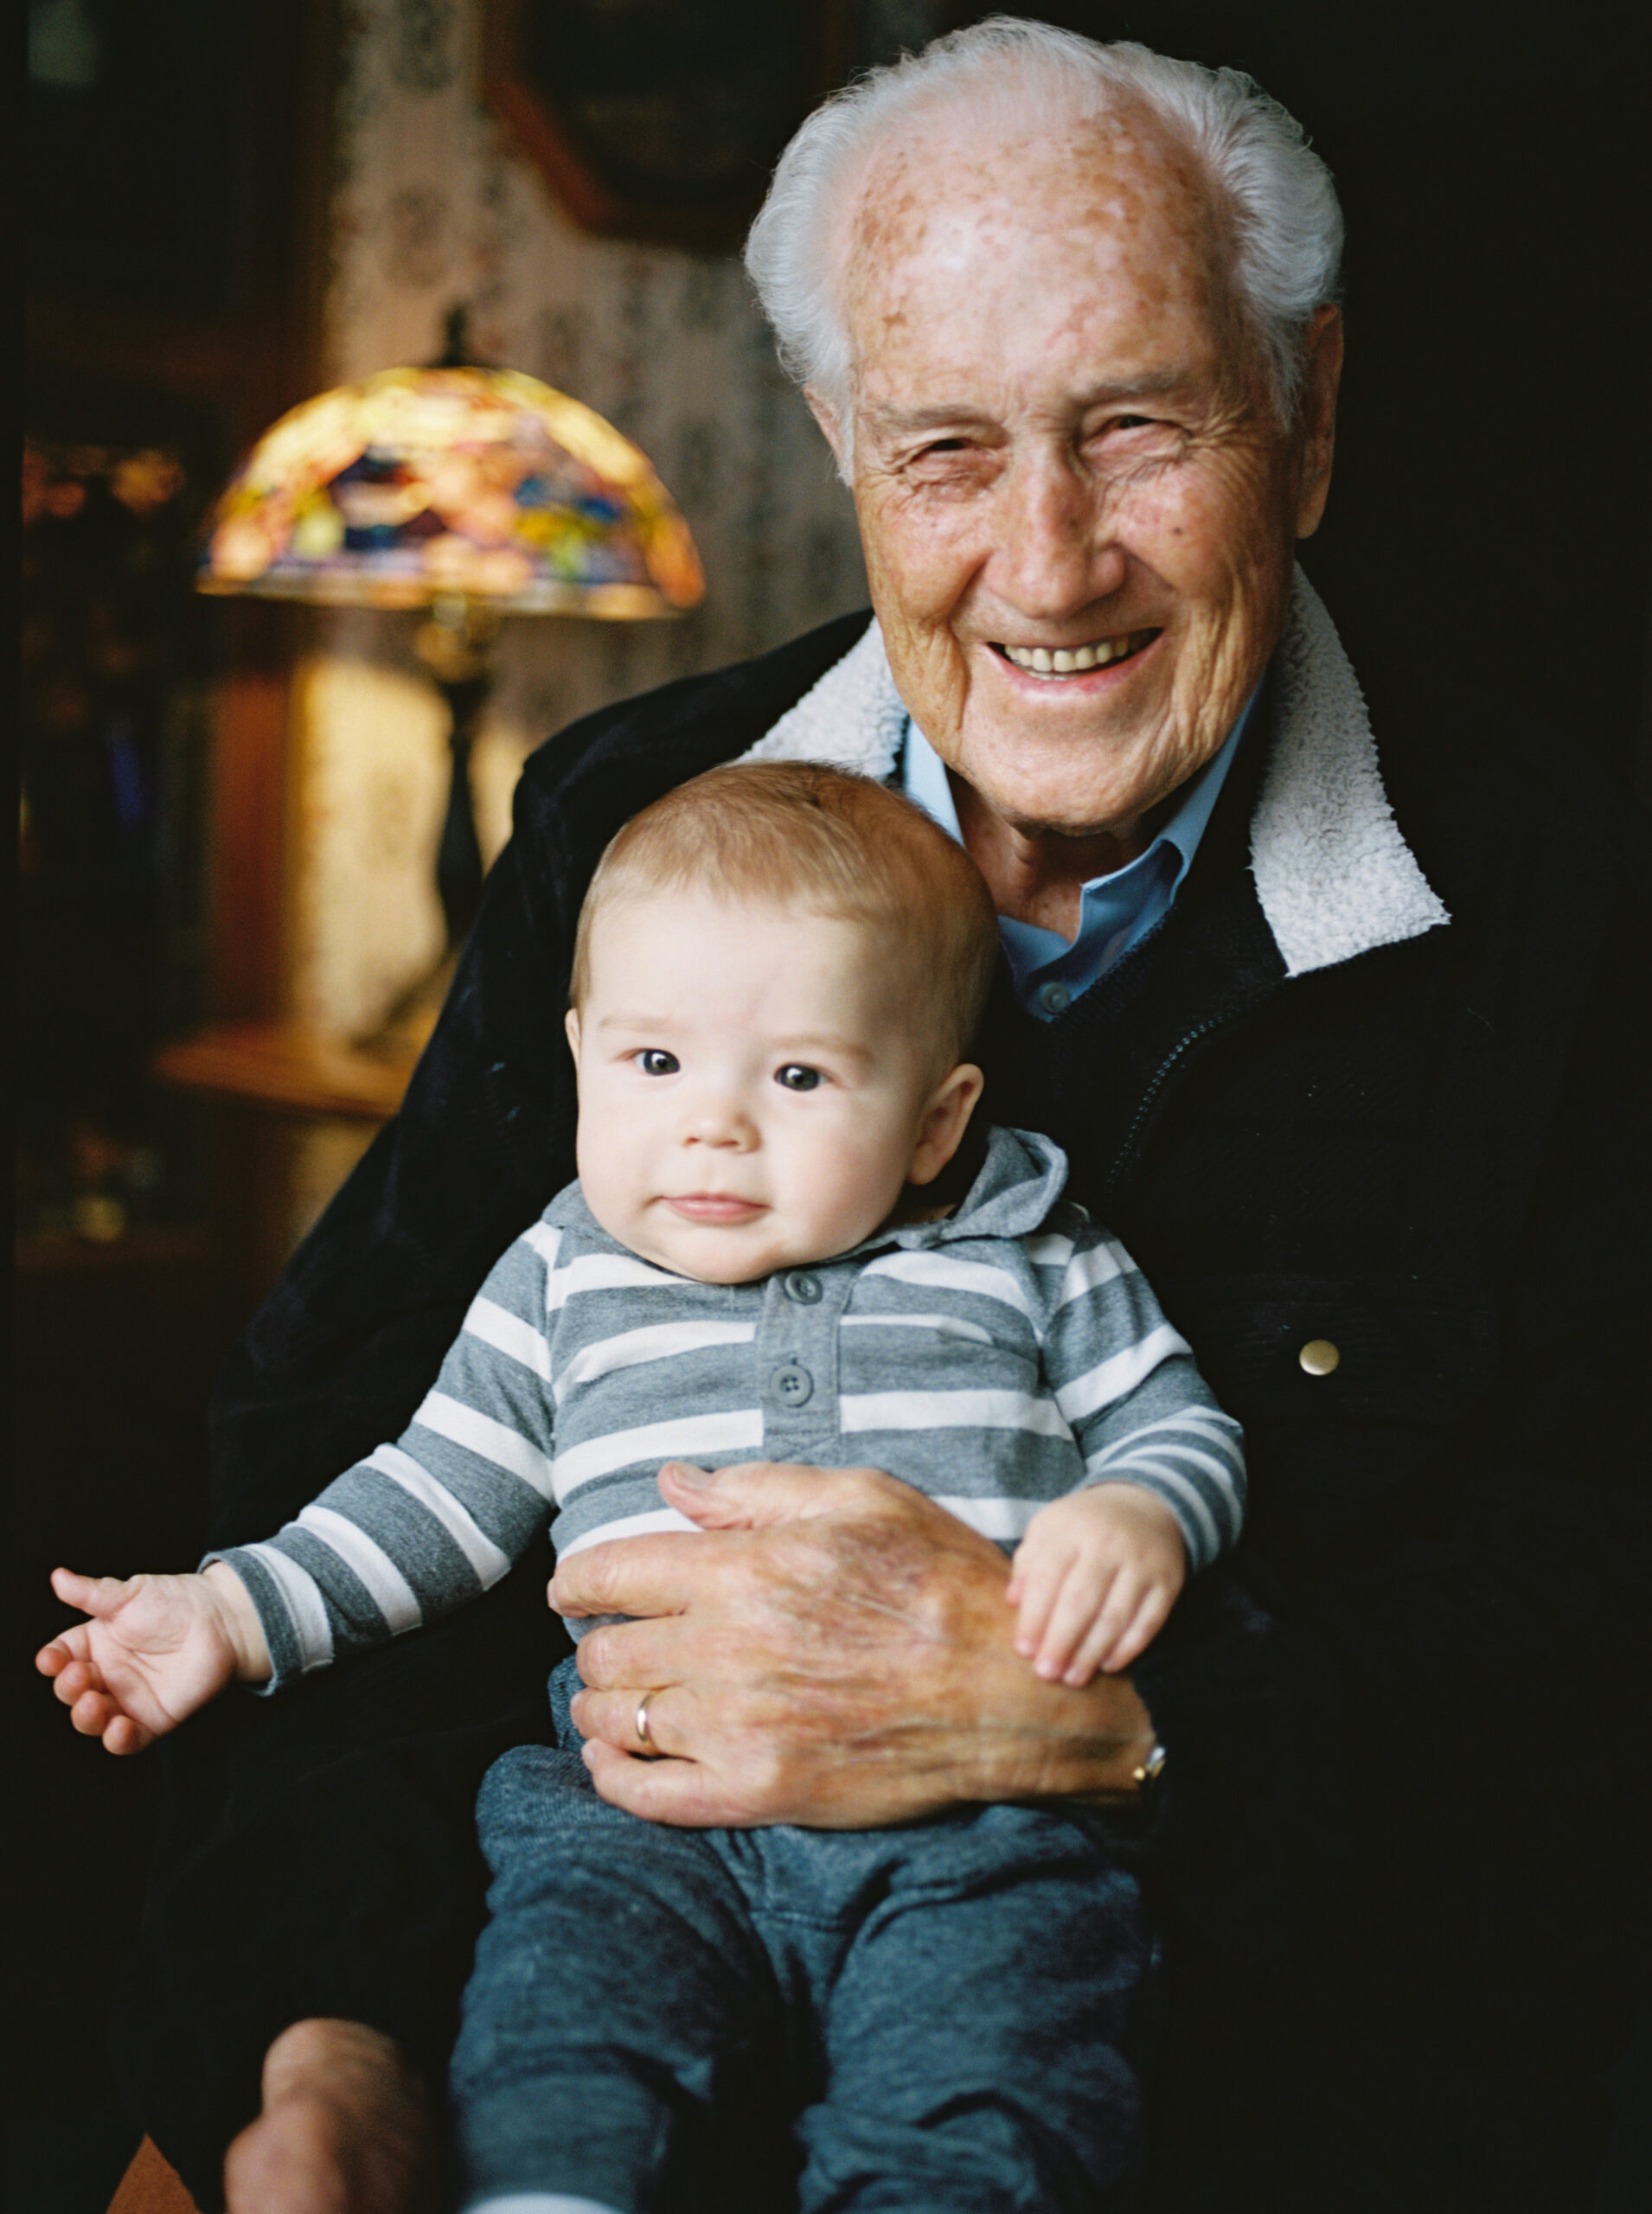 Our son Hudson George and his great-grandfather George